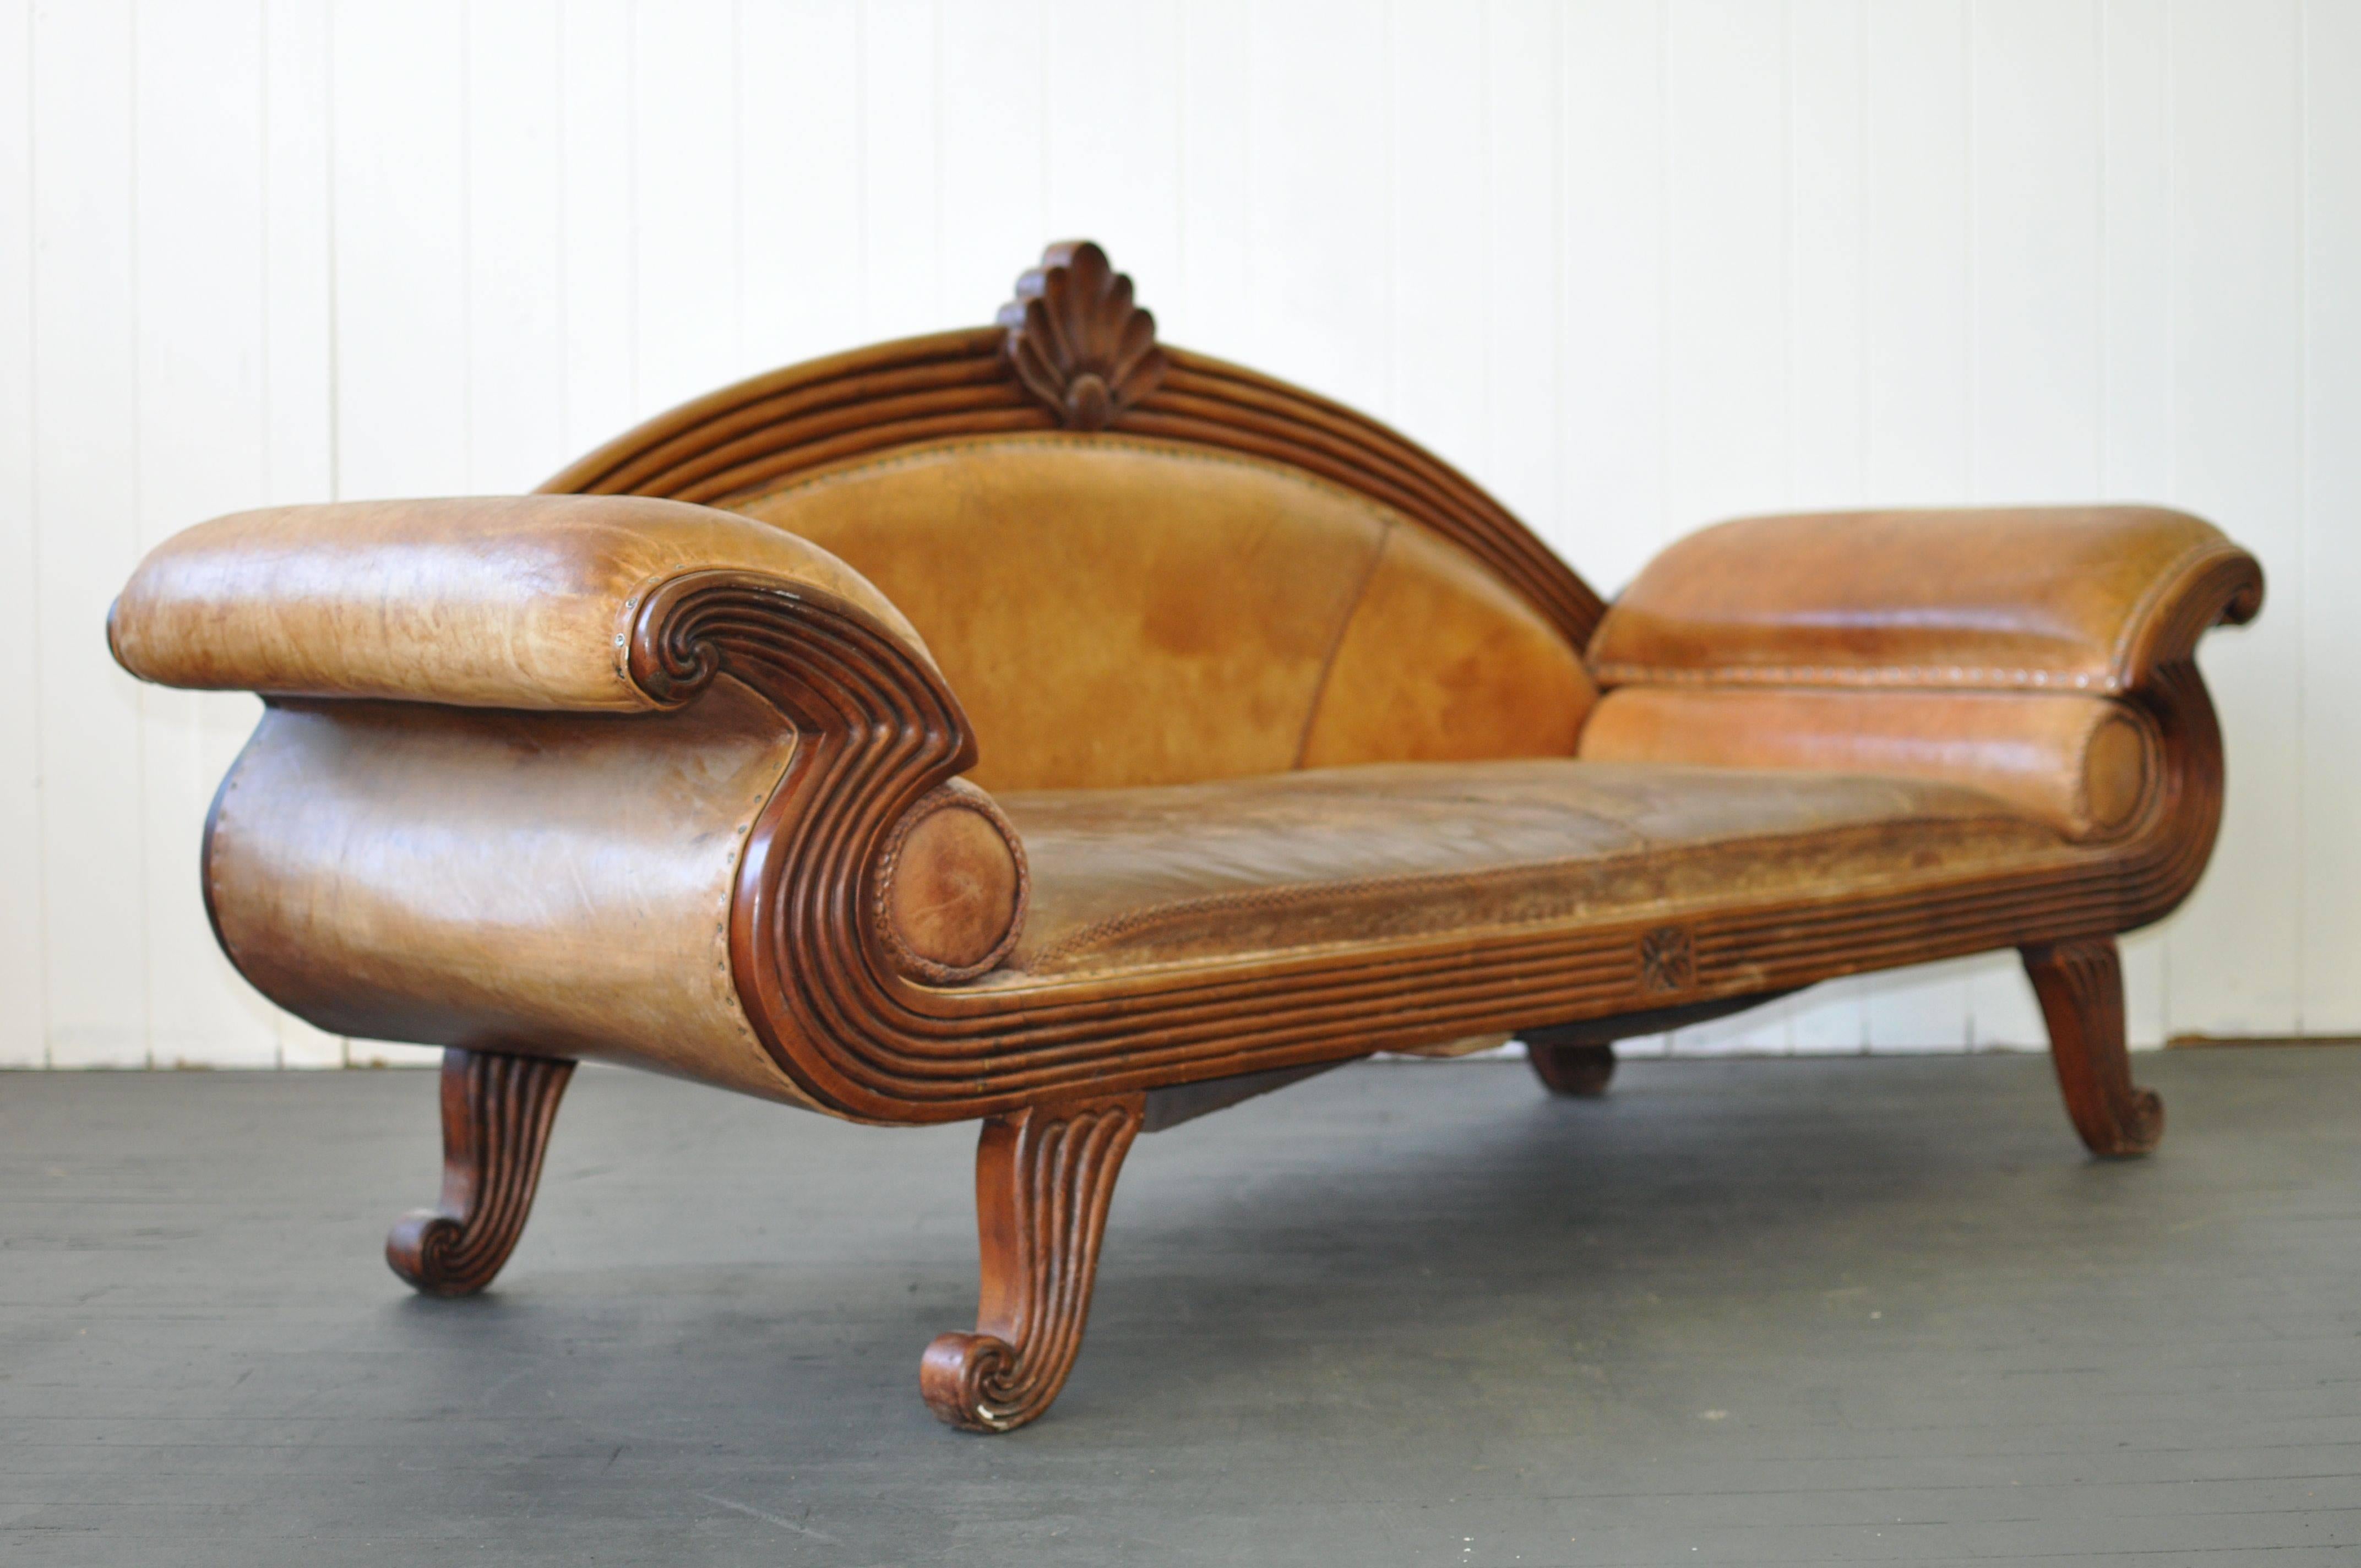 Early 20th century European leather sofa with original distressed hand-stitched leather. Carved Mahogany frame.